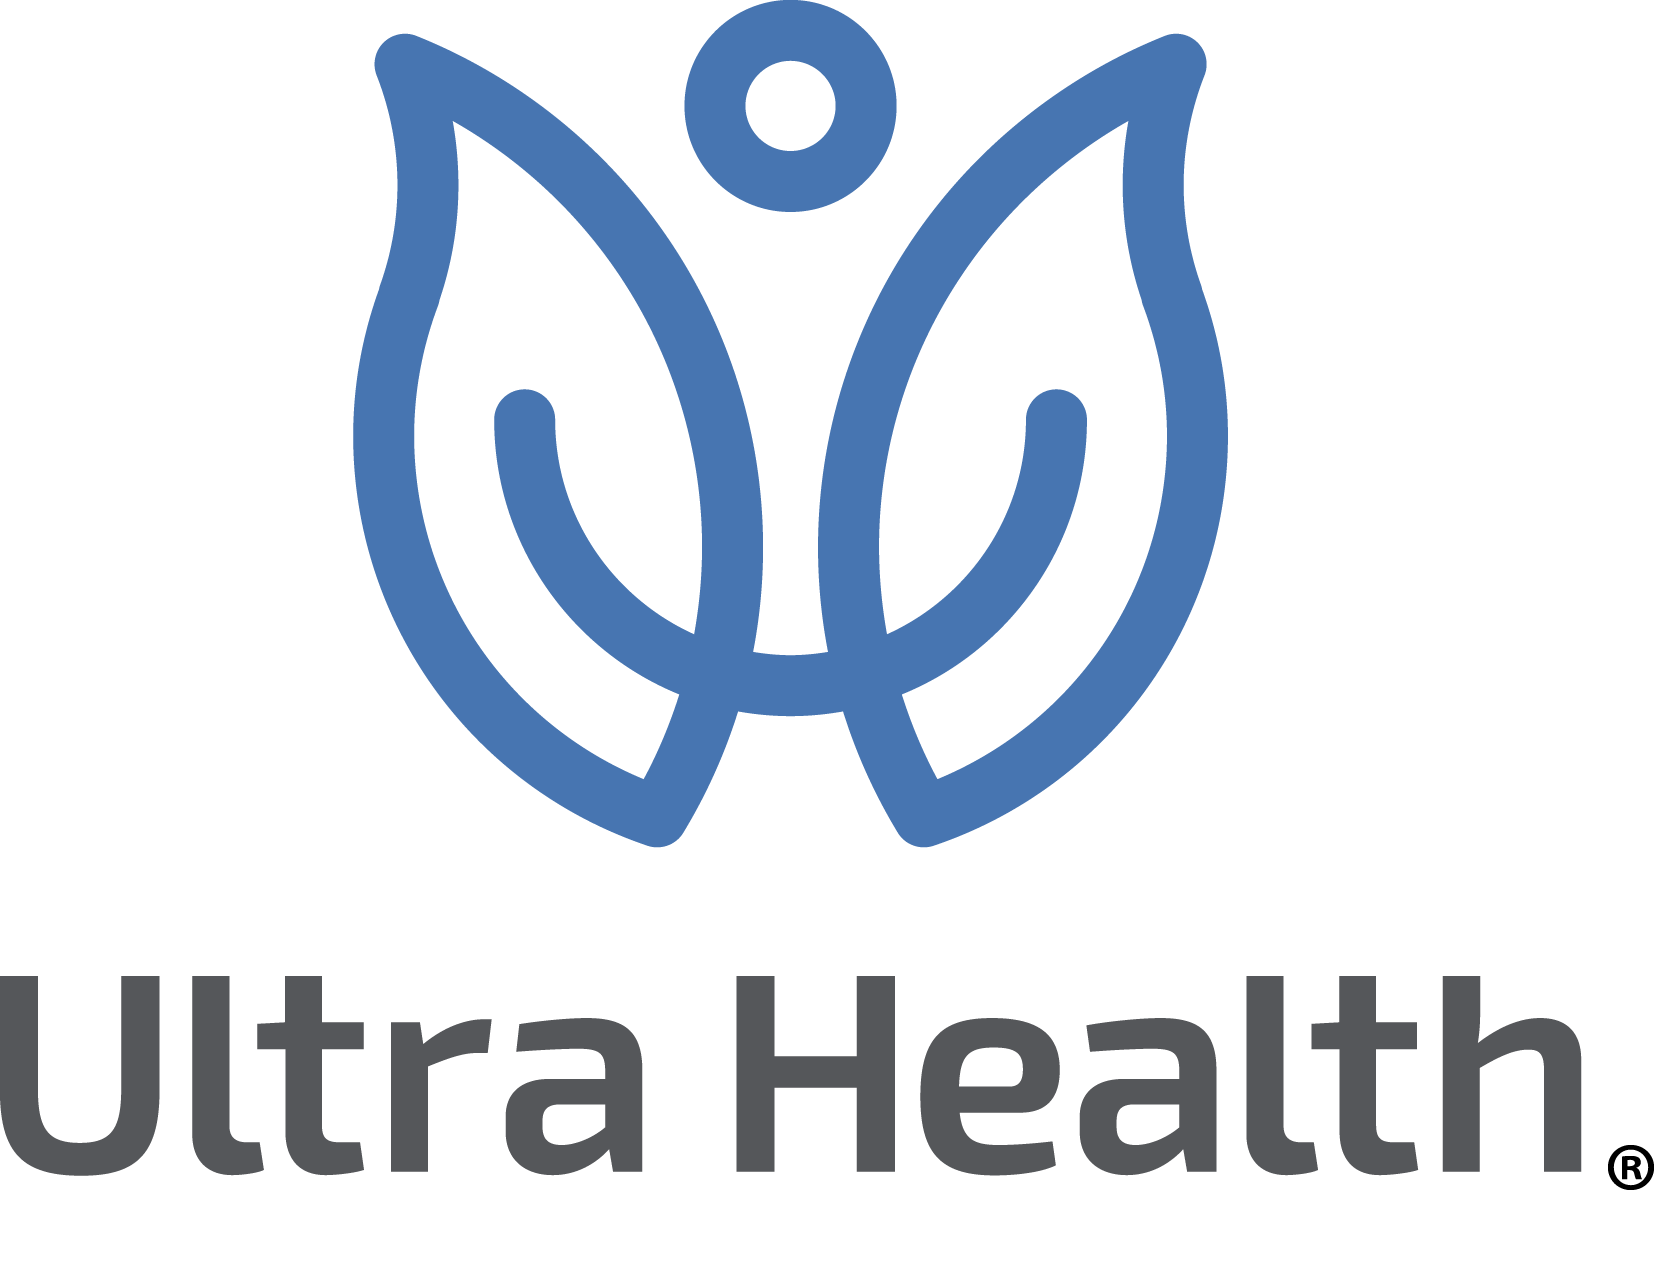 https://ultrahealth.com/2017/08/28/ultra-health-opens-eighth-location-now-six-n-m-counties/